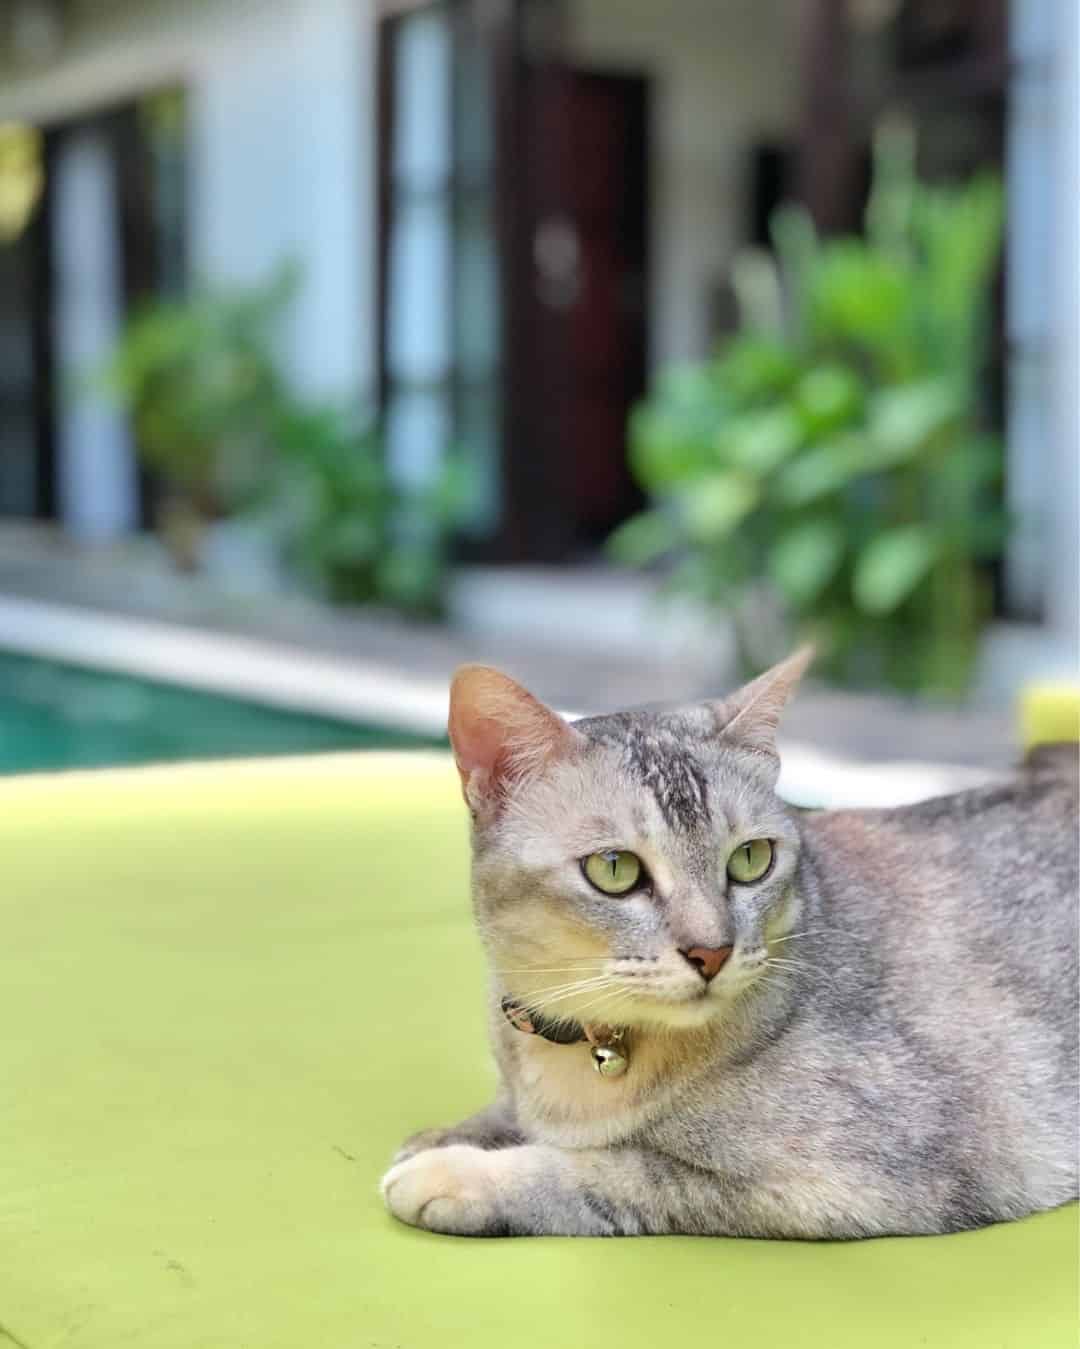 Mama cat, who stays at Kembali Lagi Guest House